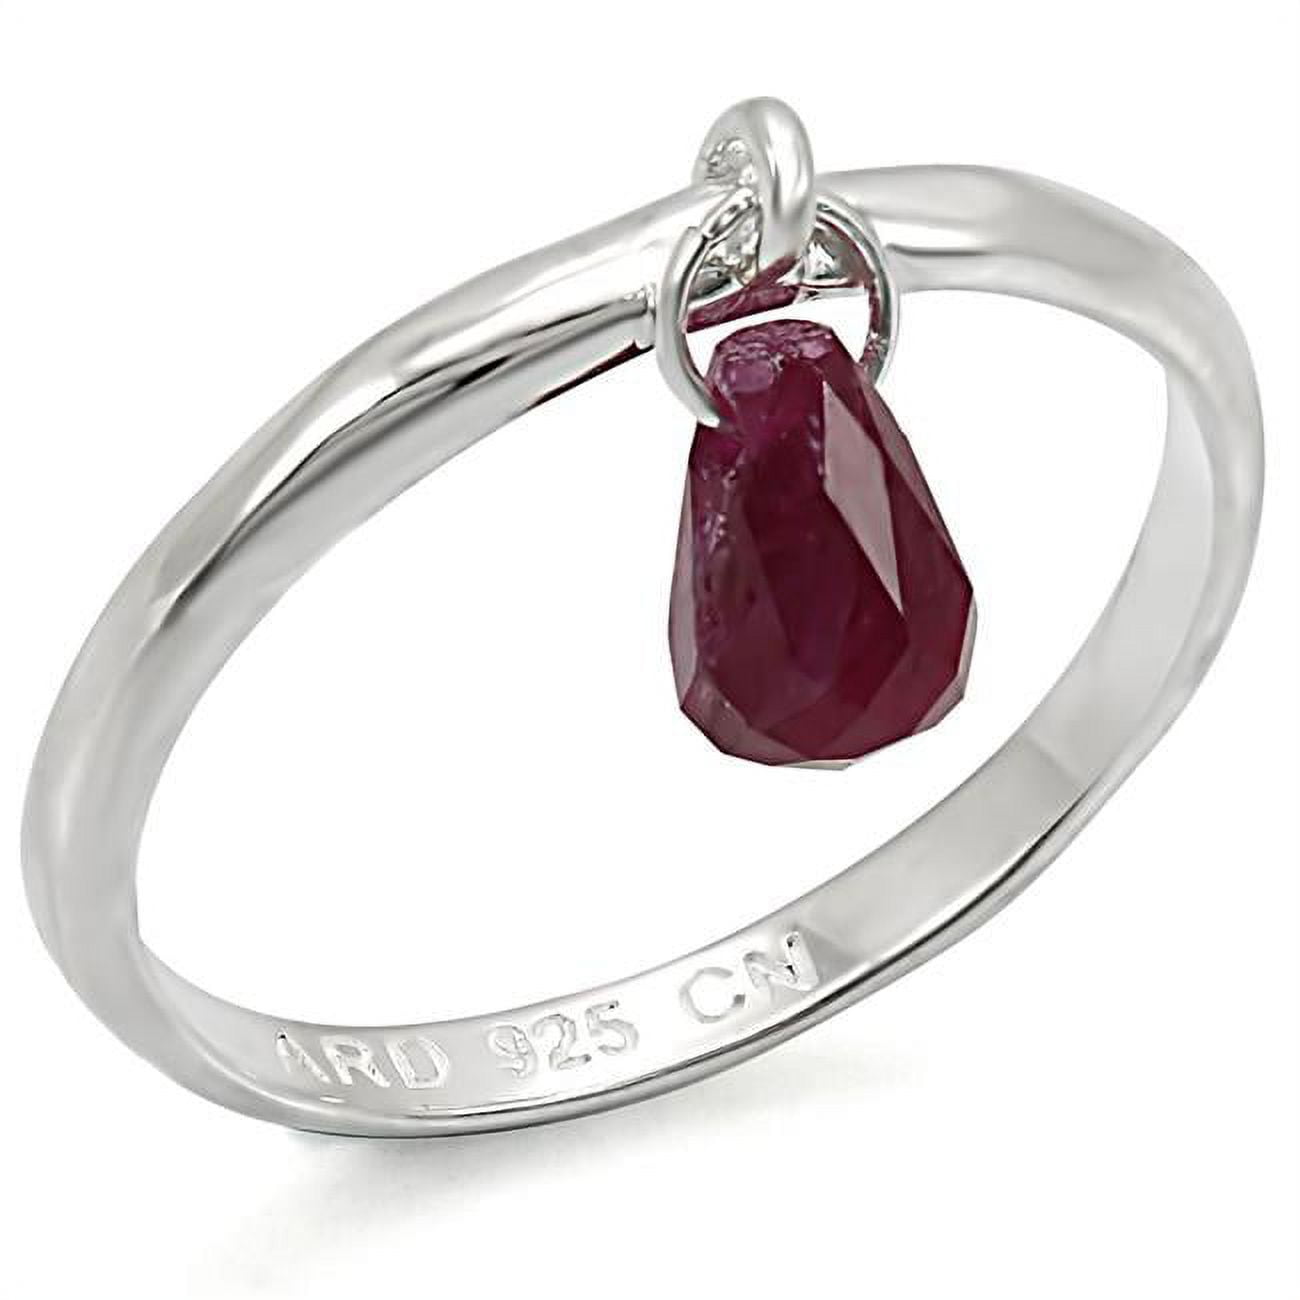 Picture of Alamode LOS324-9 Women Silver 925 Sterling Silver Ring with Genuine Stone in Ruby - Size 9